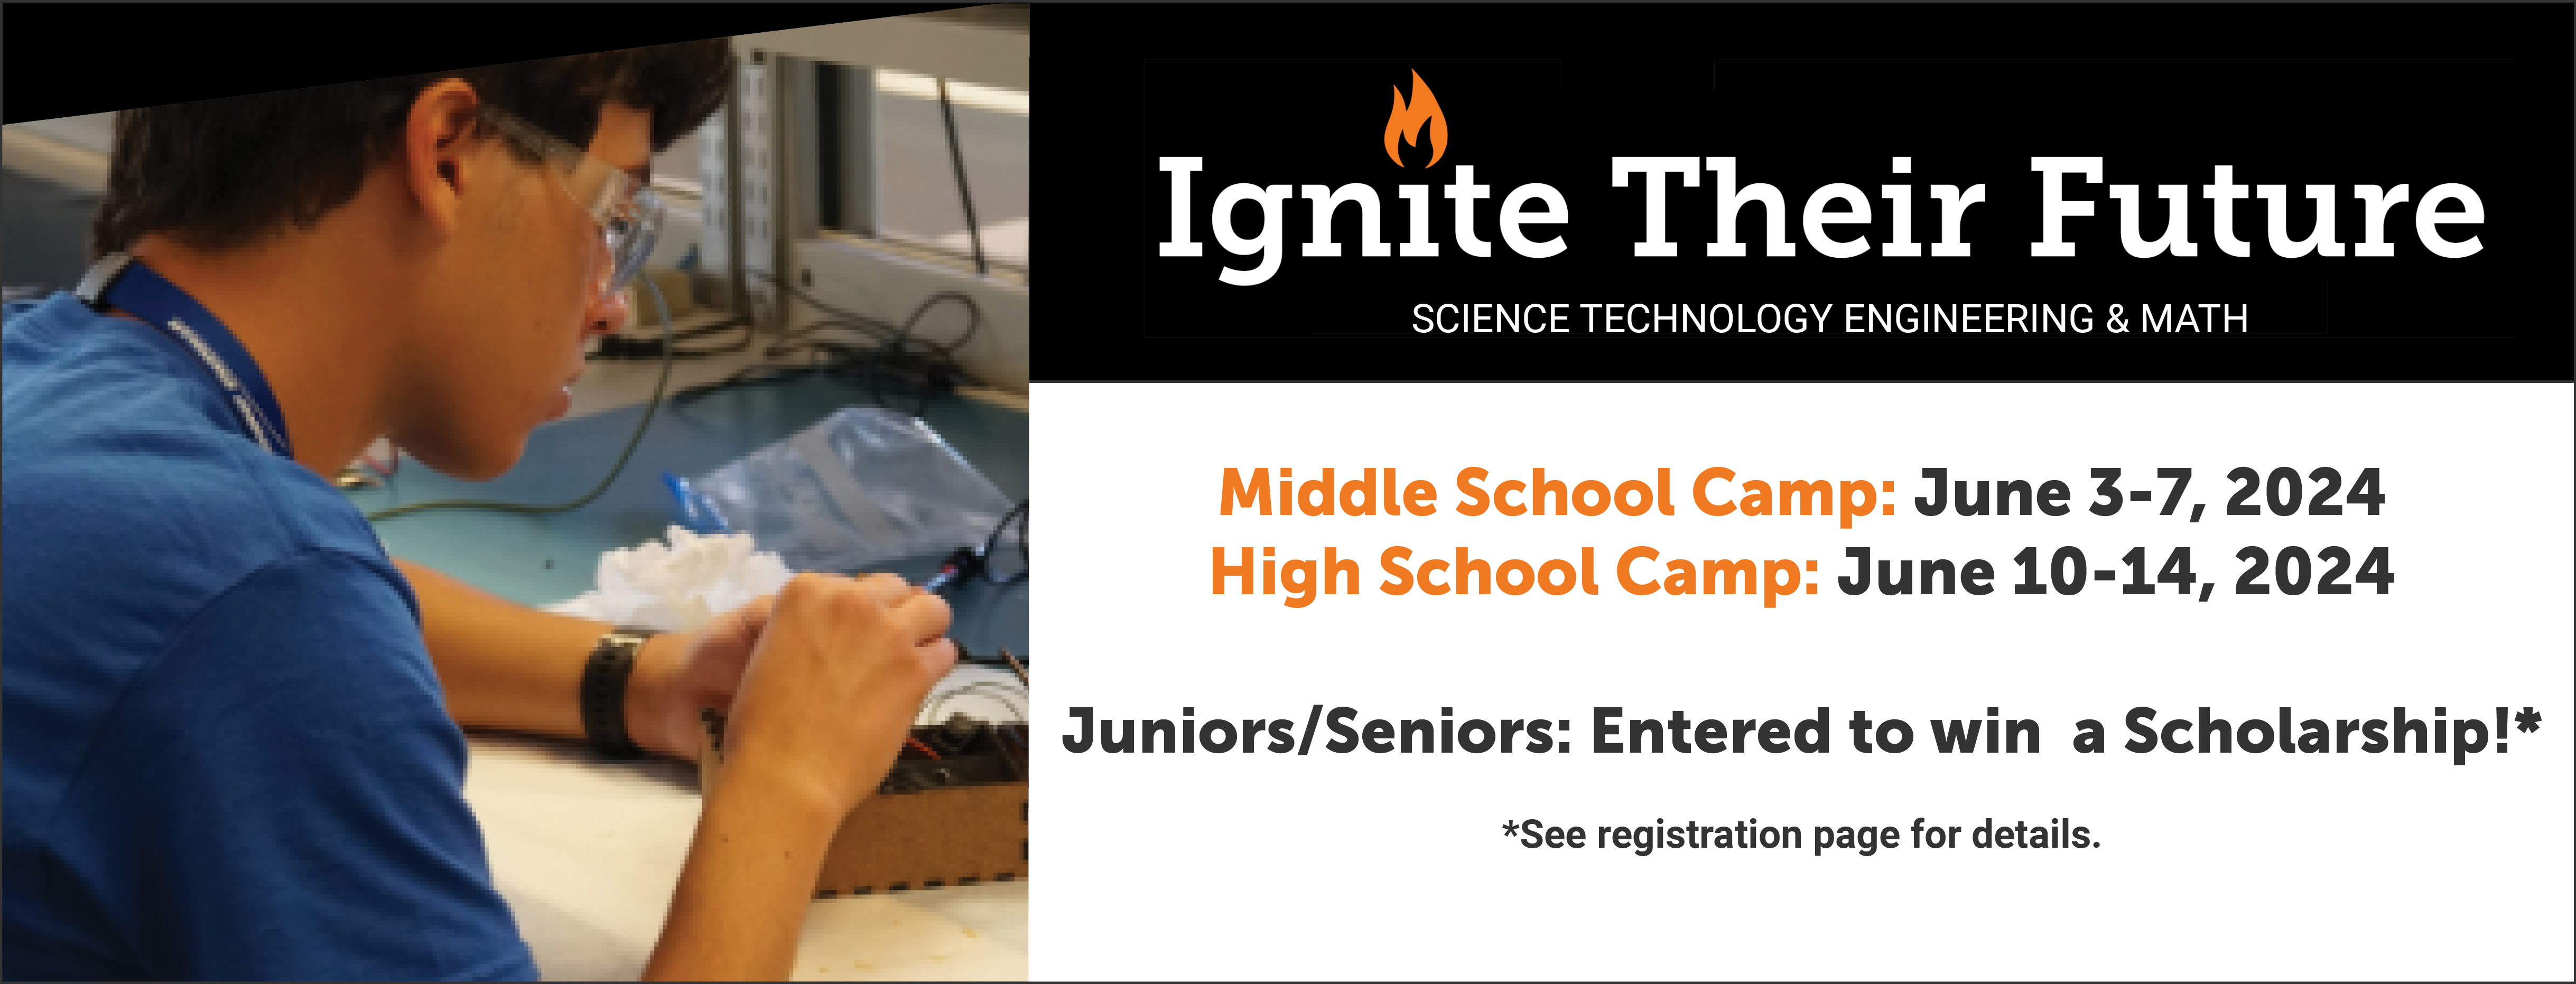 Ignite Their Future 2024 is now Open to Register